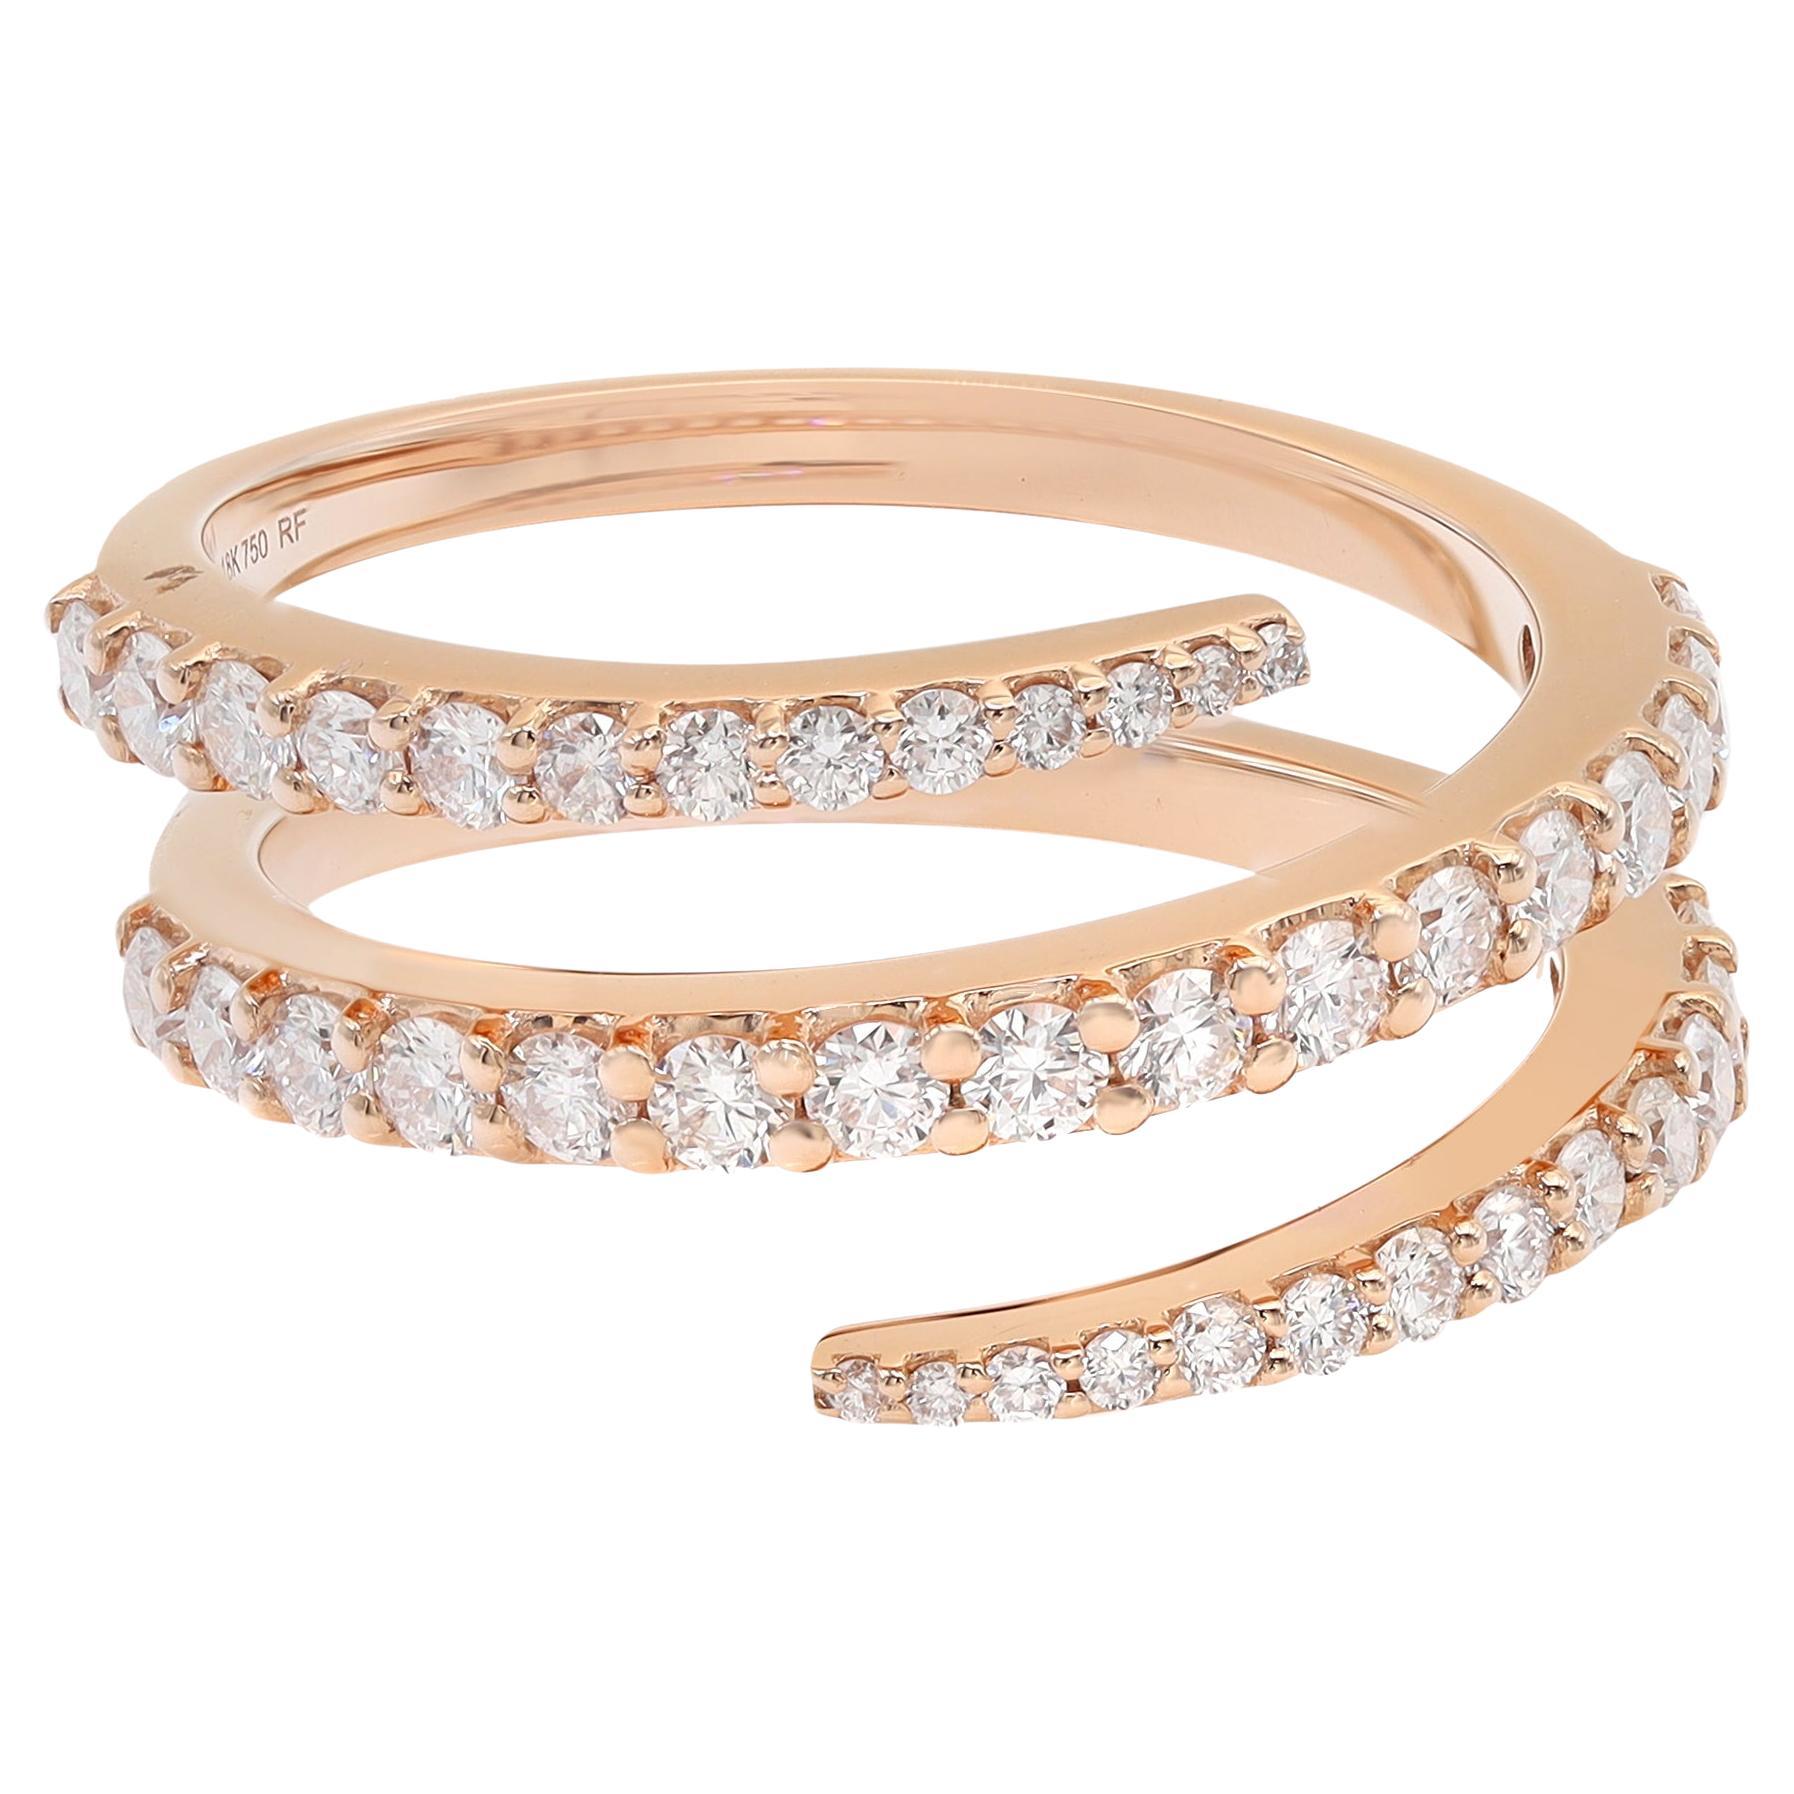 Idylle Blossom Paved Ring, 3 Golds and Diamonds - Luxury Gold